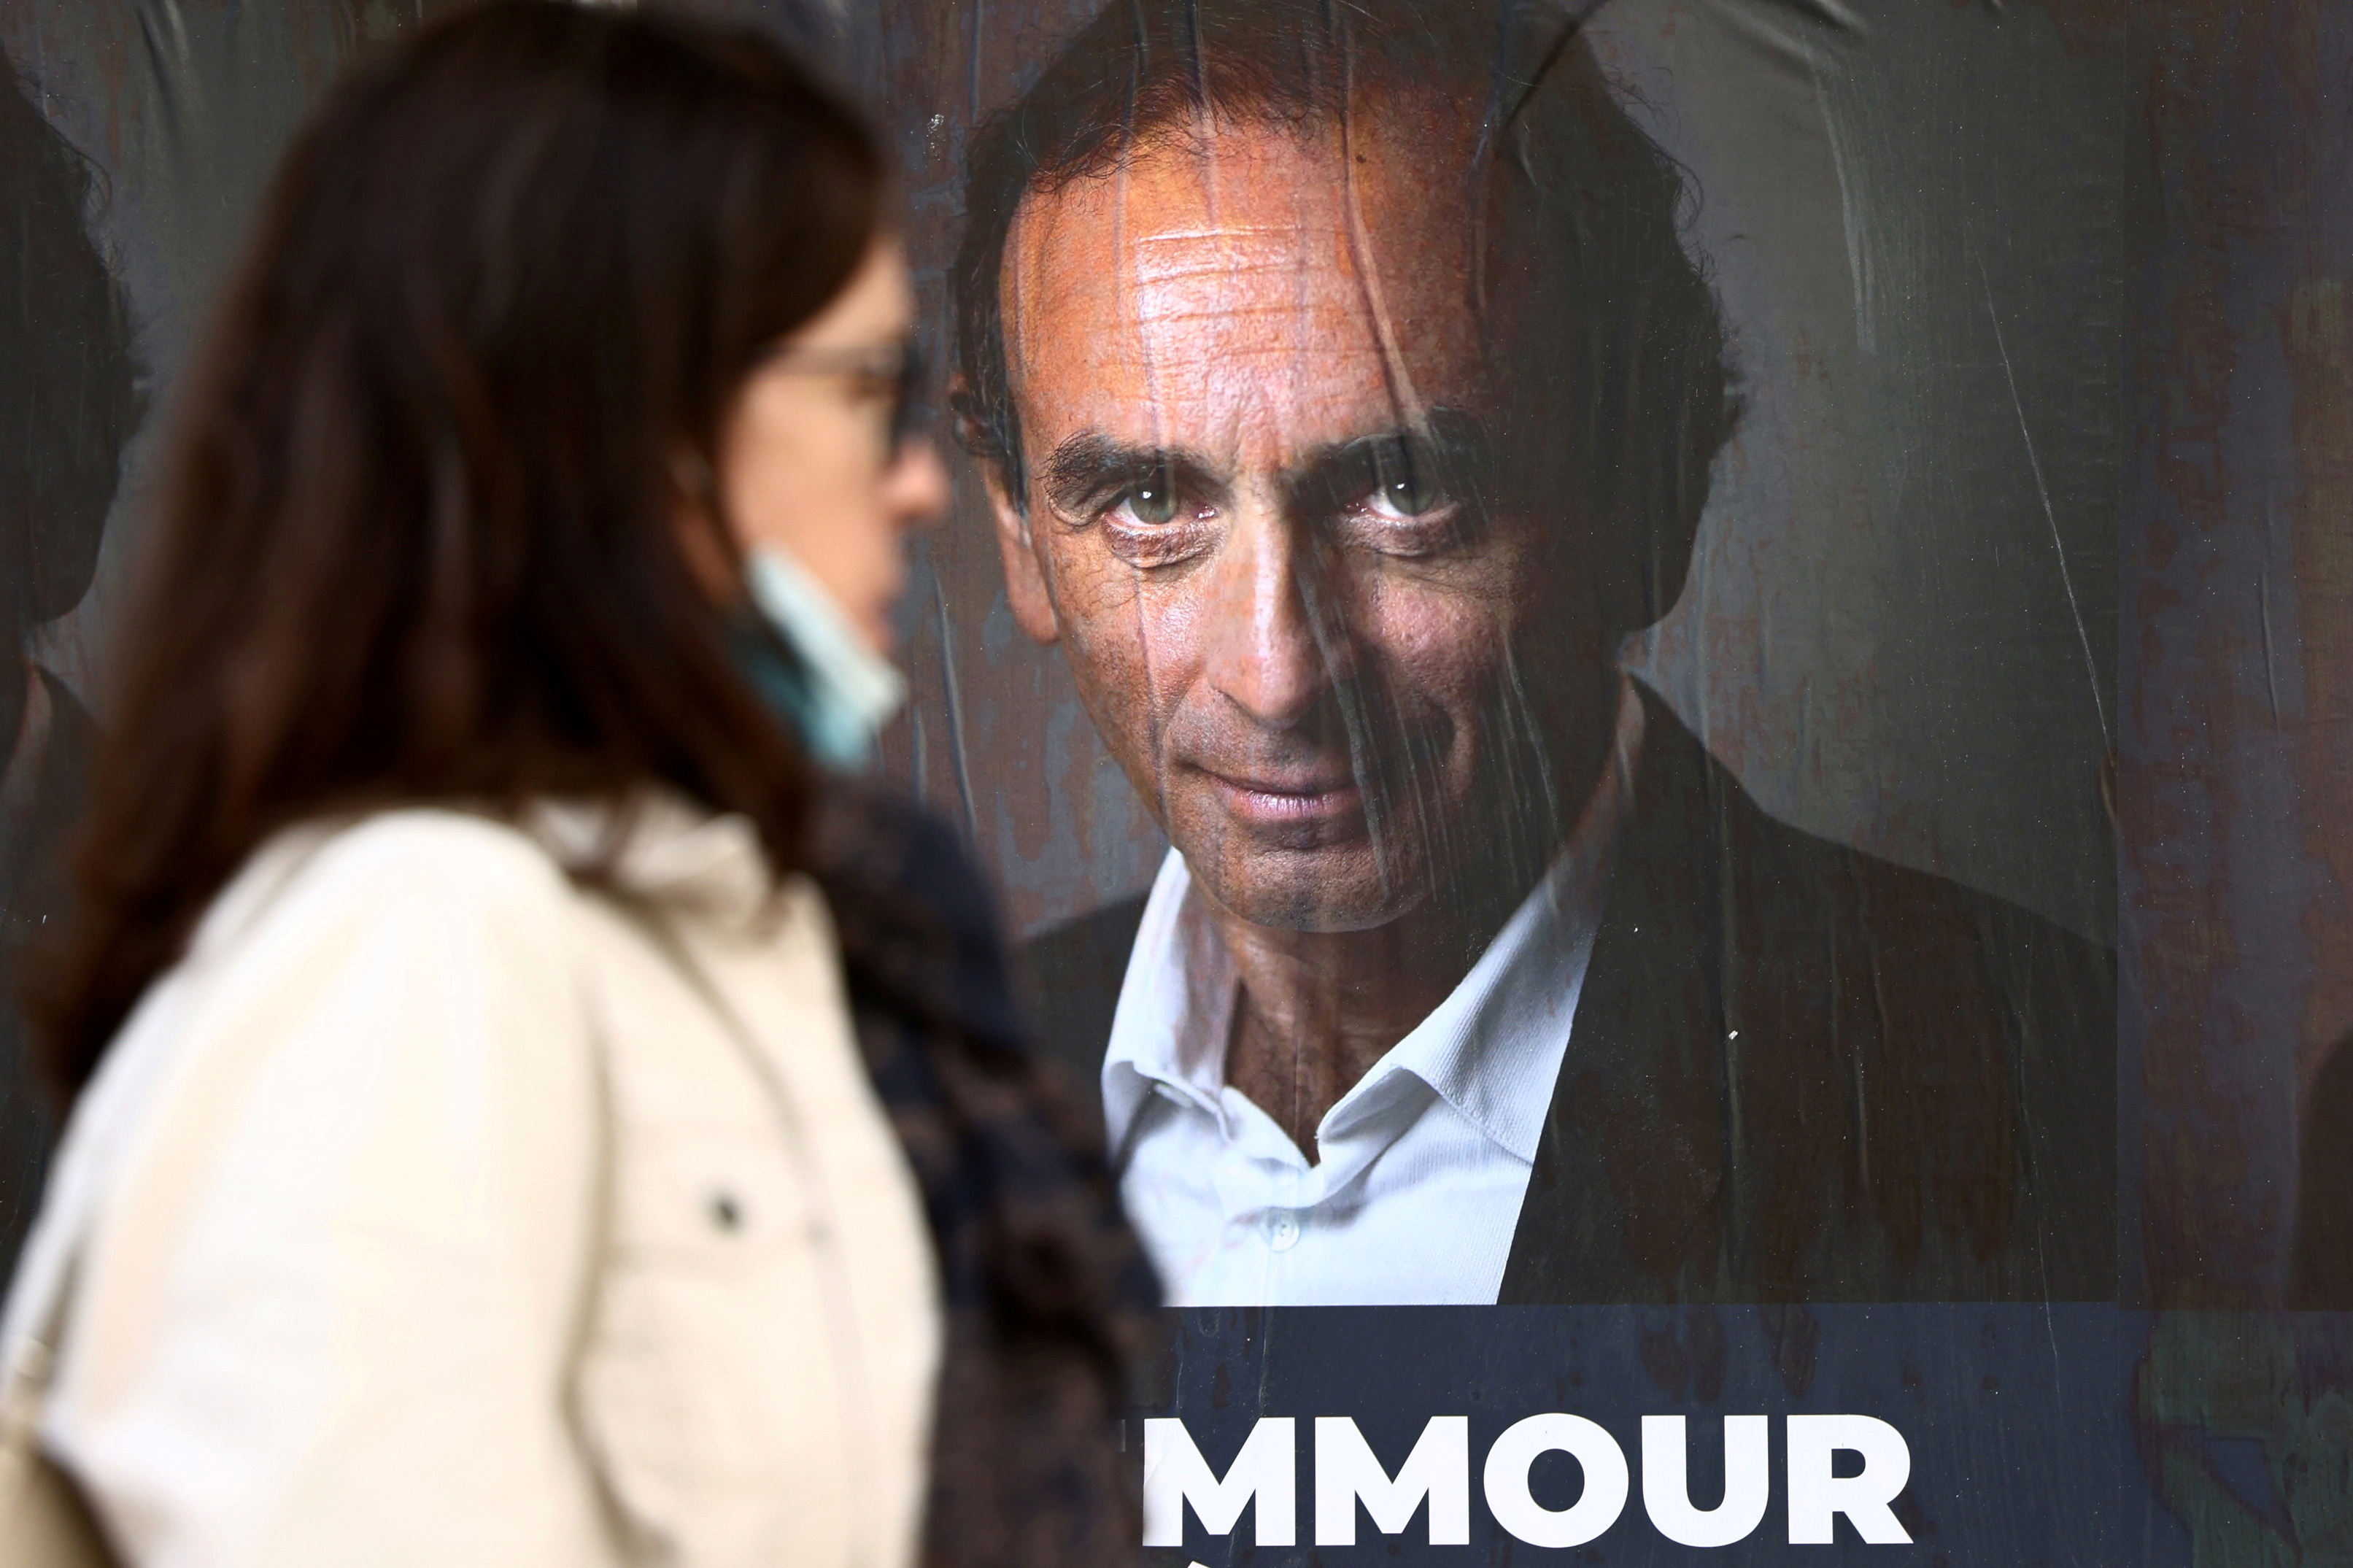 A woman walks past posters in support of French right-wing extremist commentator Eric Zemmour, likely candidate for the French presidential election next April, posted on a wall in Paris, France, 13 October 2021. Photo taken 13 October 2021. REUTERS / Sarah Meyssonnier / Photo